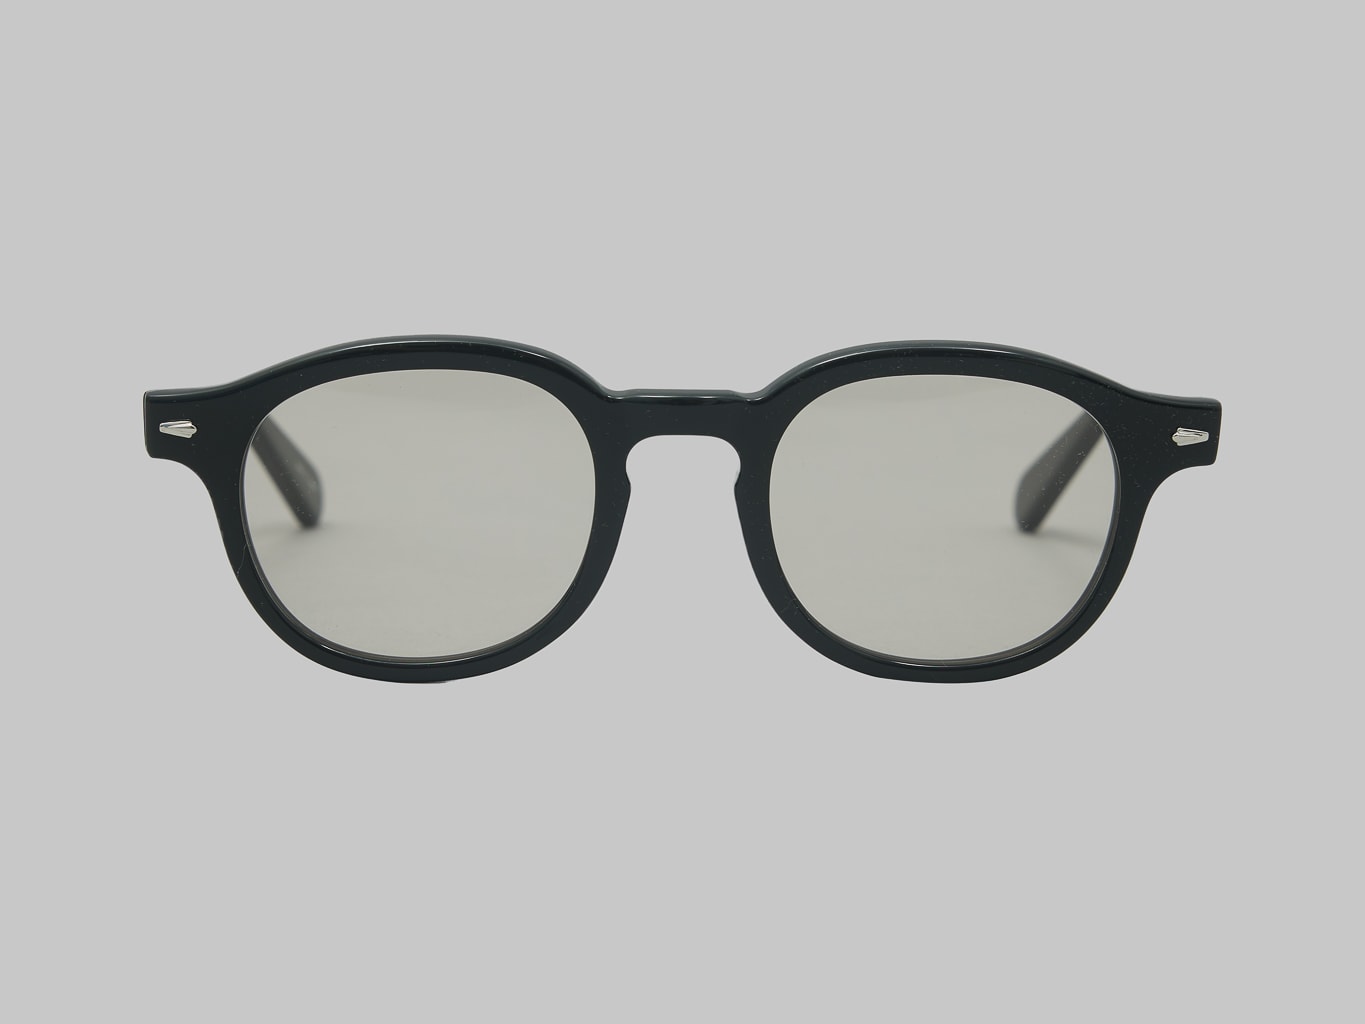 Calee Type Glasses Black Brown front